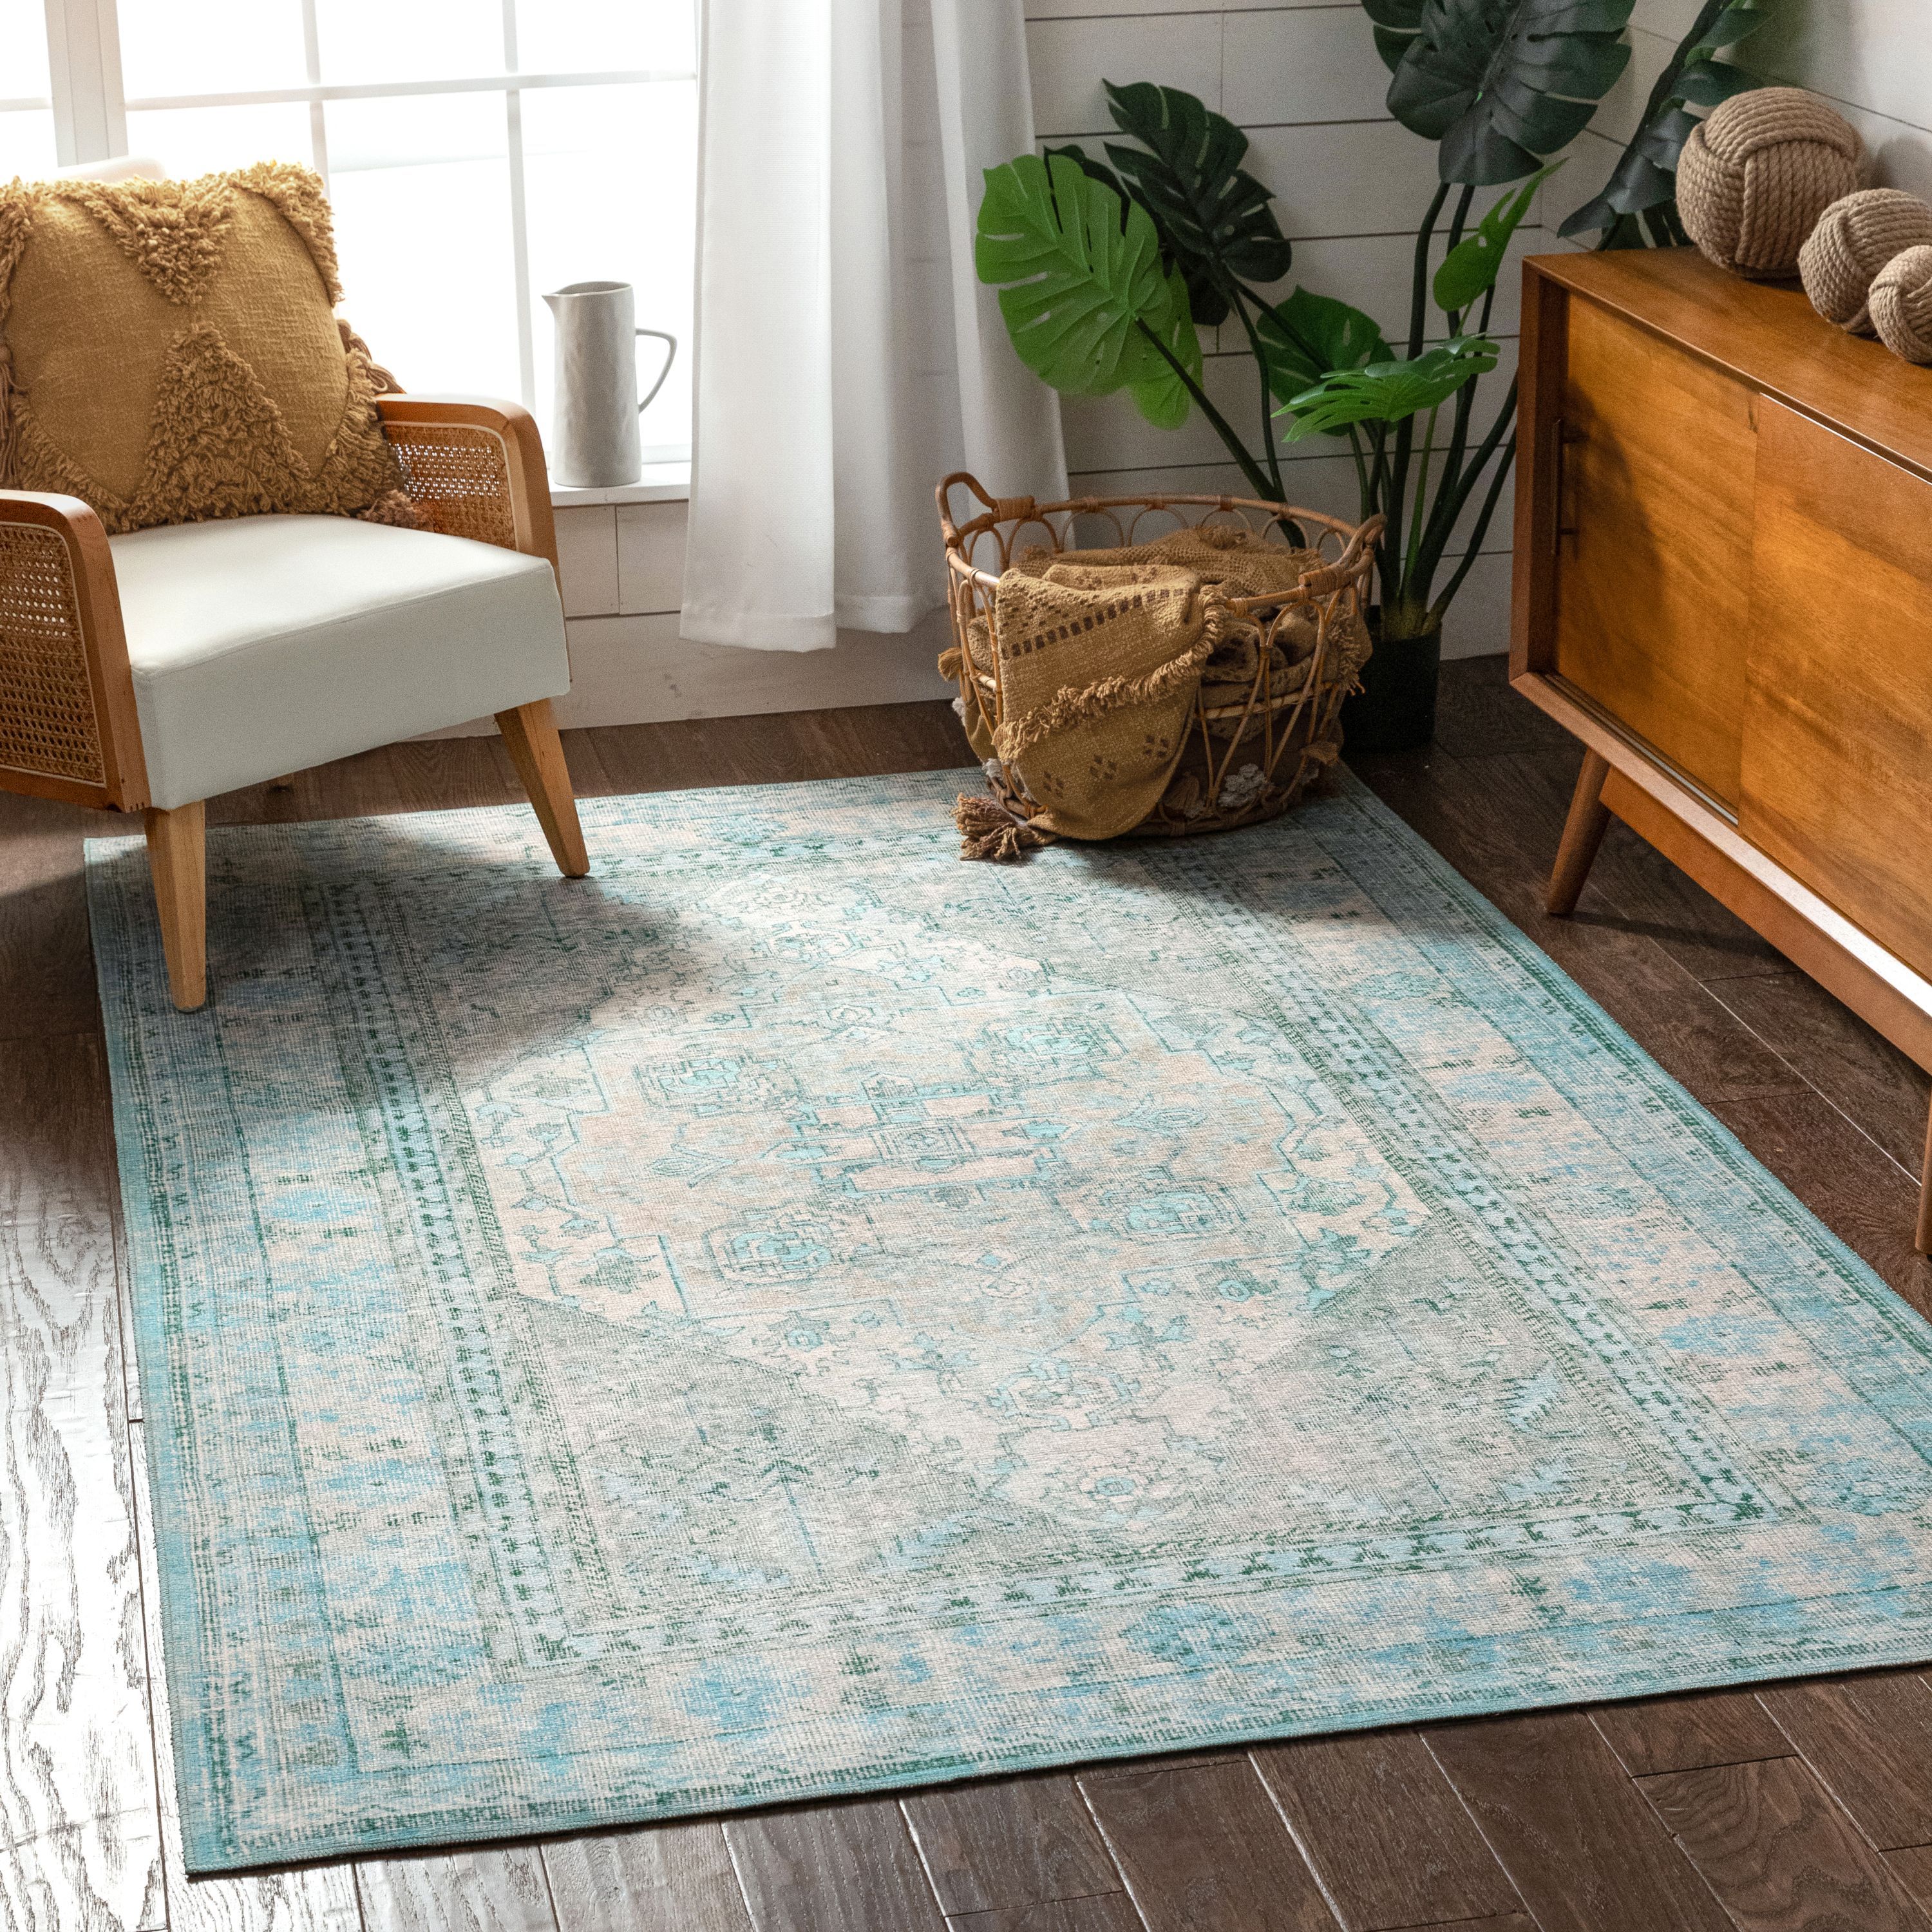 25 Machine Washable Rugs Perfect For, Washable Cotton Rugs